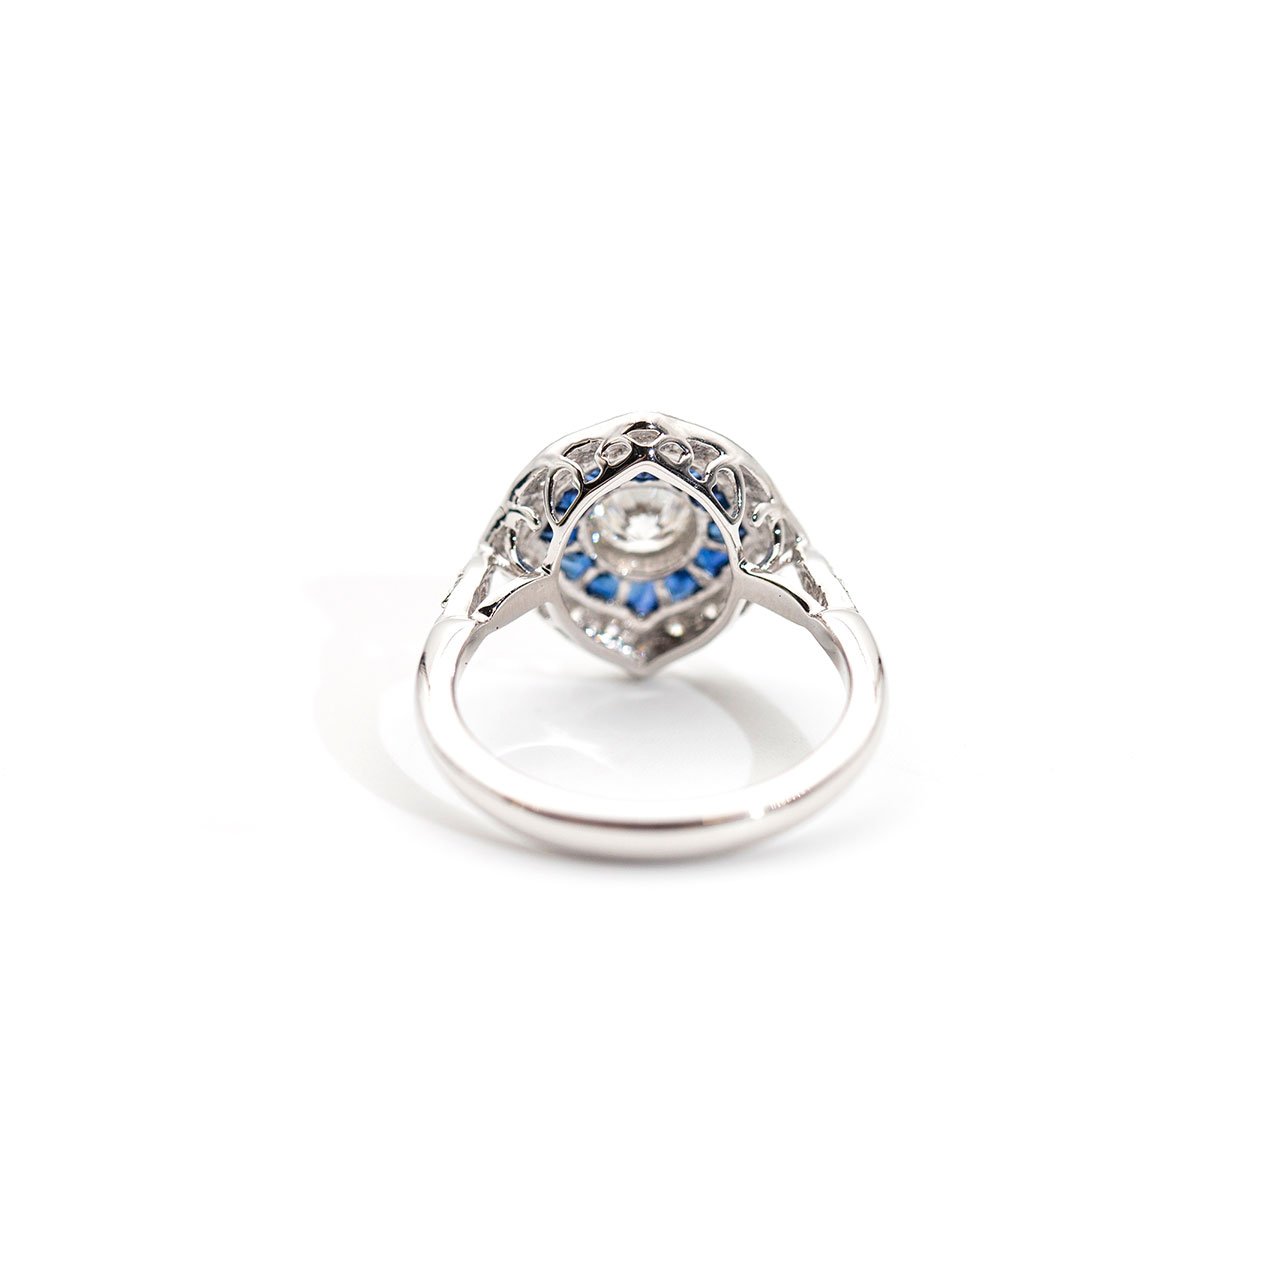 Jenny Diamond and Blue Sapphire Art Deco Ring Ring Imperial Jewellery - Auctions, Antique, Vintage & Estate 